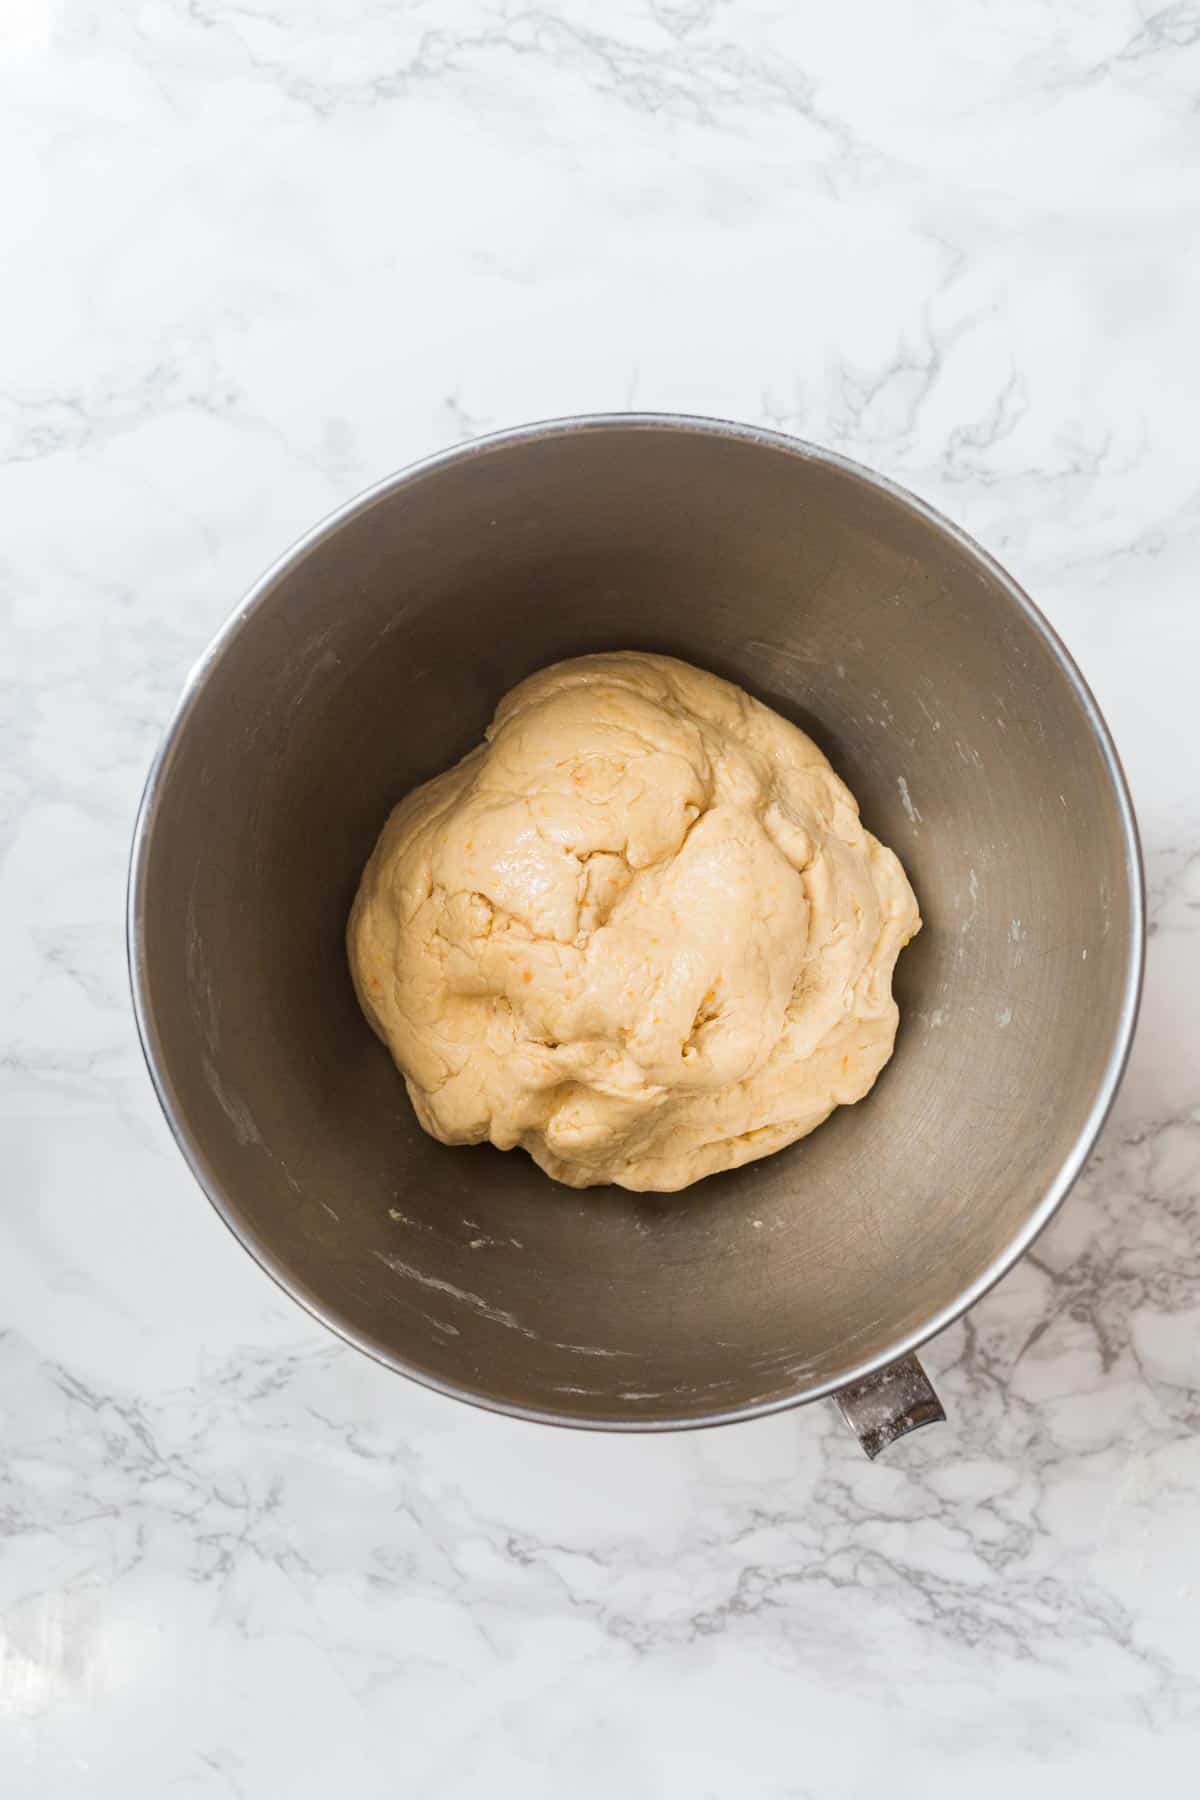 Bread dough in metal bowl on counter